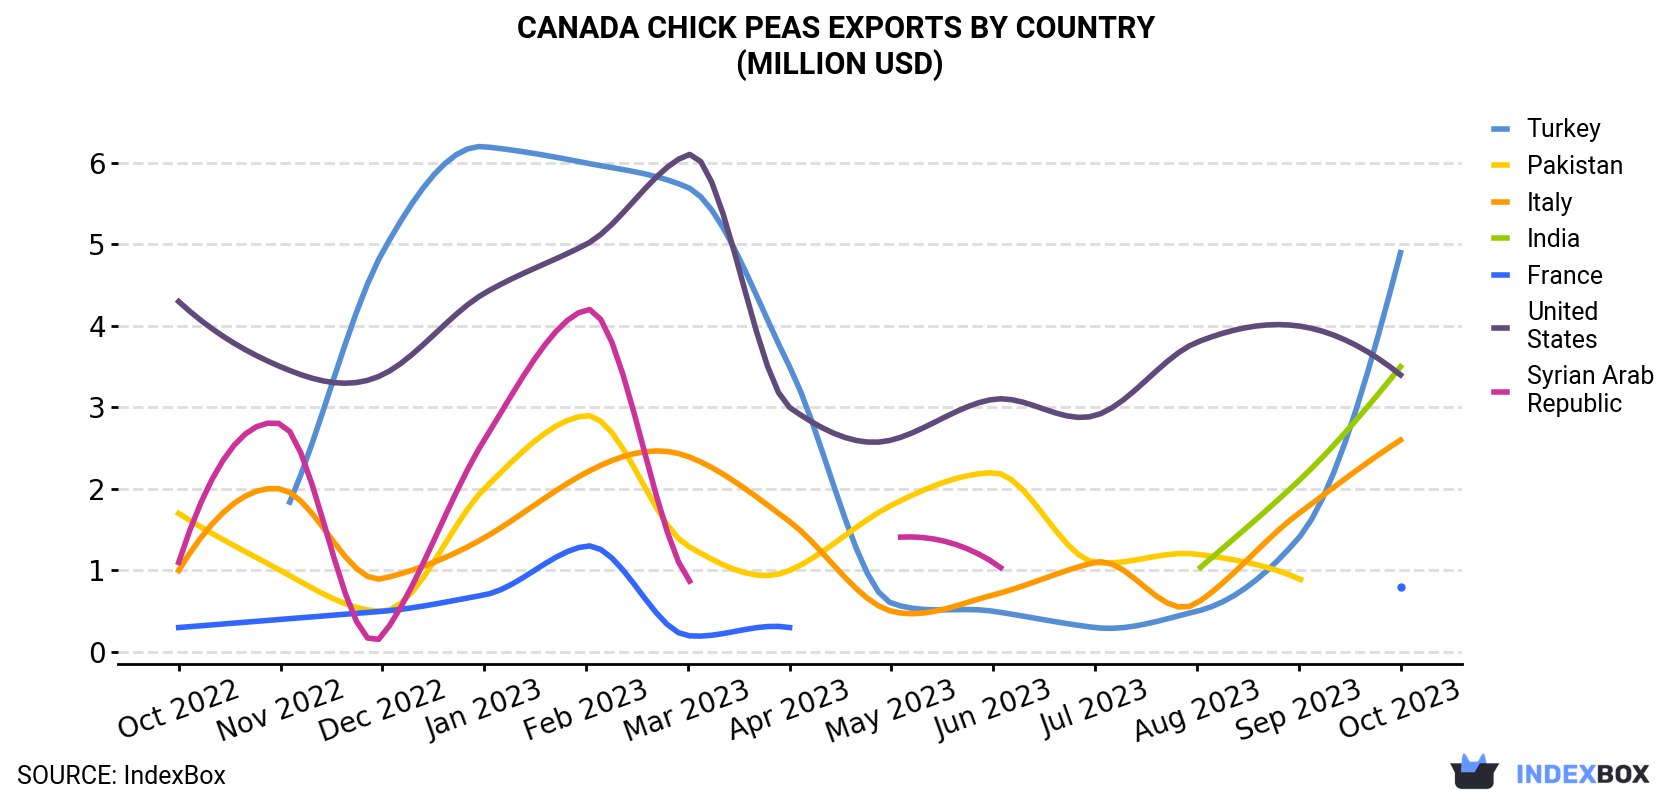 Canada Chick Peas Exports By Country (Million USD)